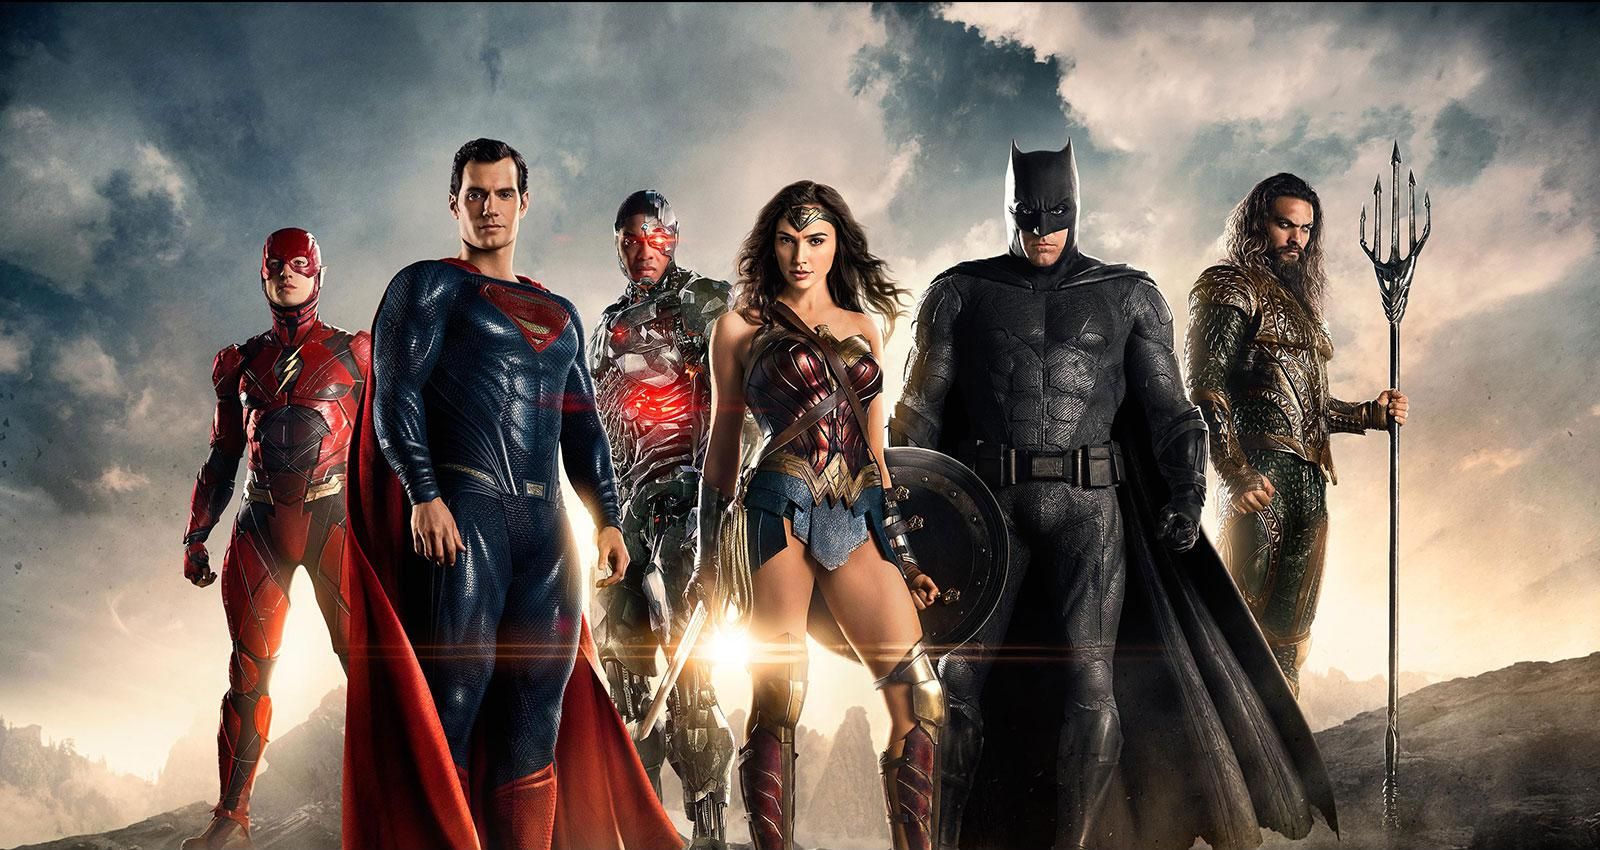 DC Movies in Order: How to Watch DC Extended Universe Films